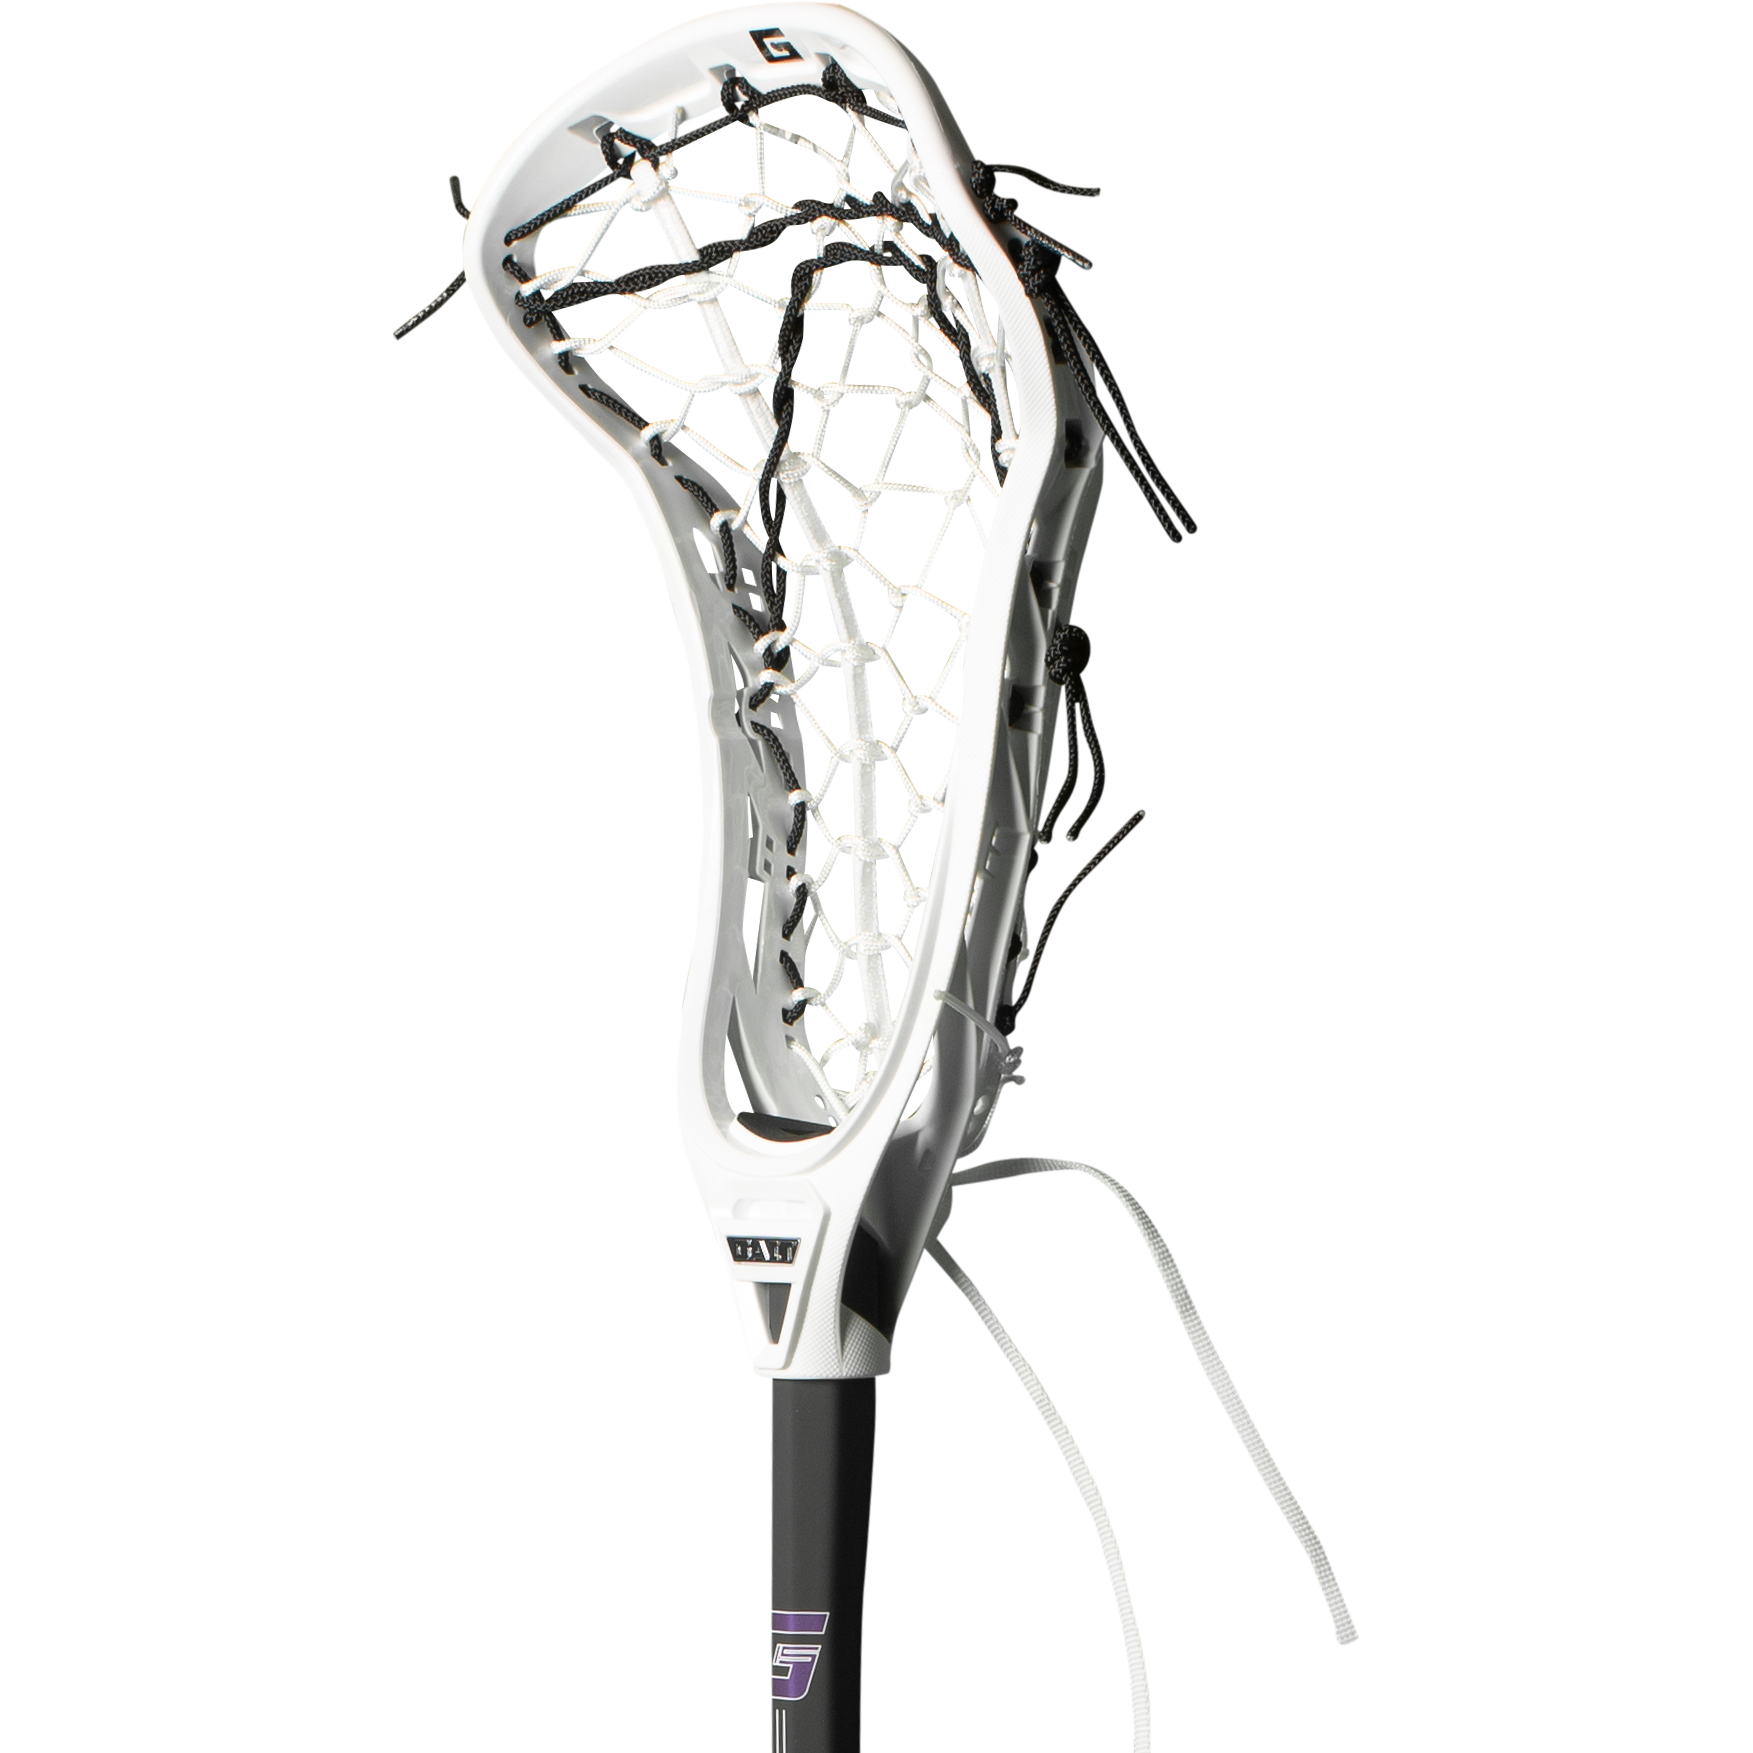 Gait Air 2 Women's Lacrosse Head with Flex Mesh White/White Black shooters angled view